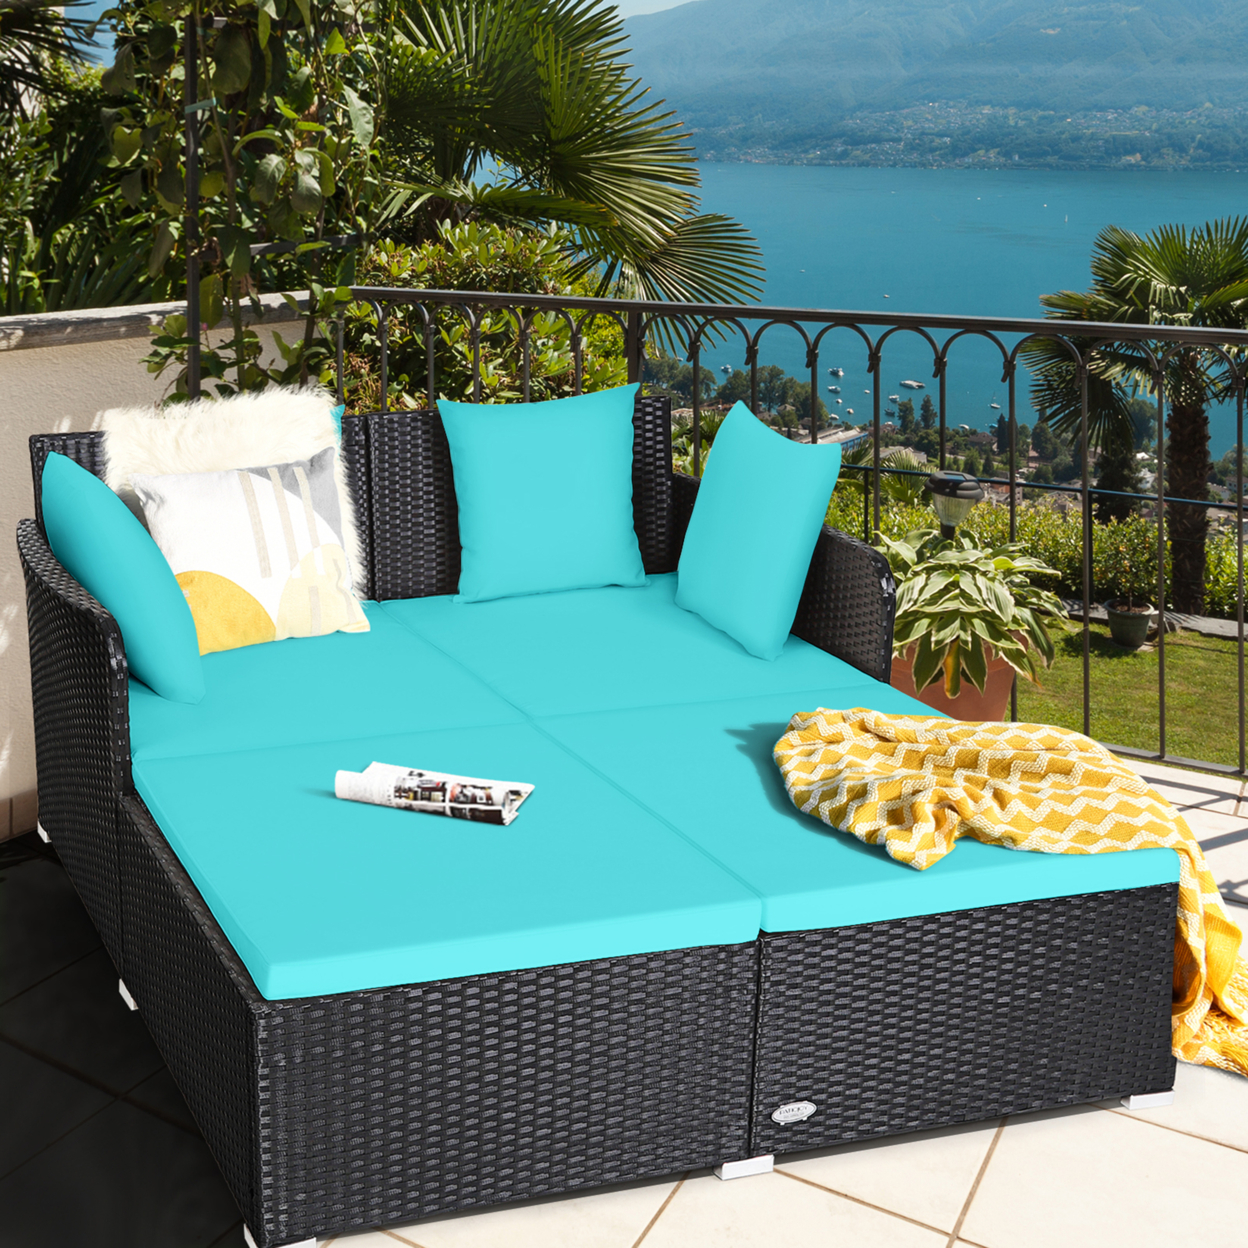 Rattan Patio Daybed Loveseat Sofa Yard Outdoor W/ Turquoise Cushions Pillows